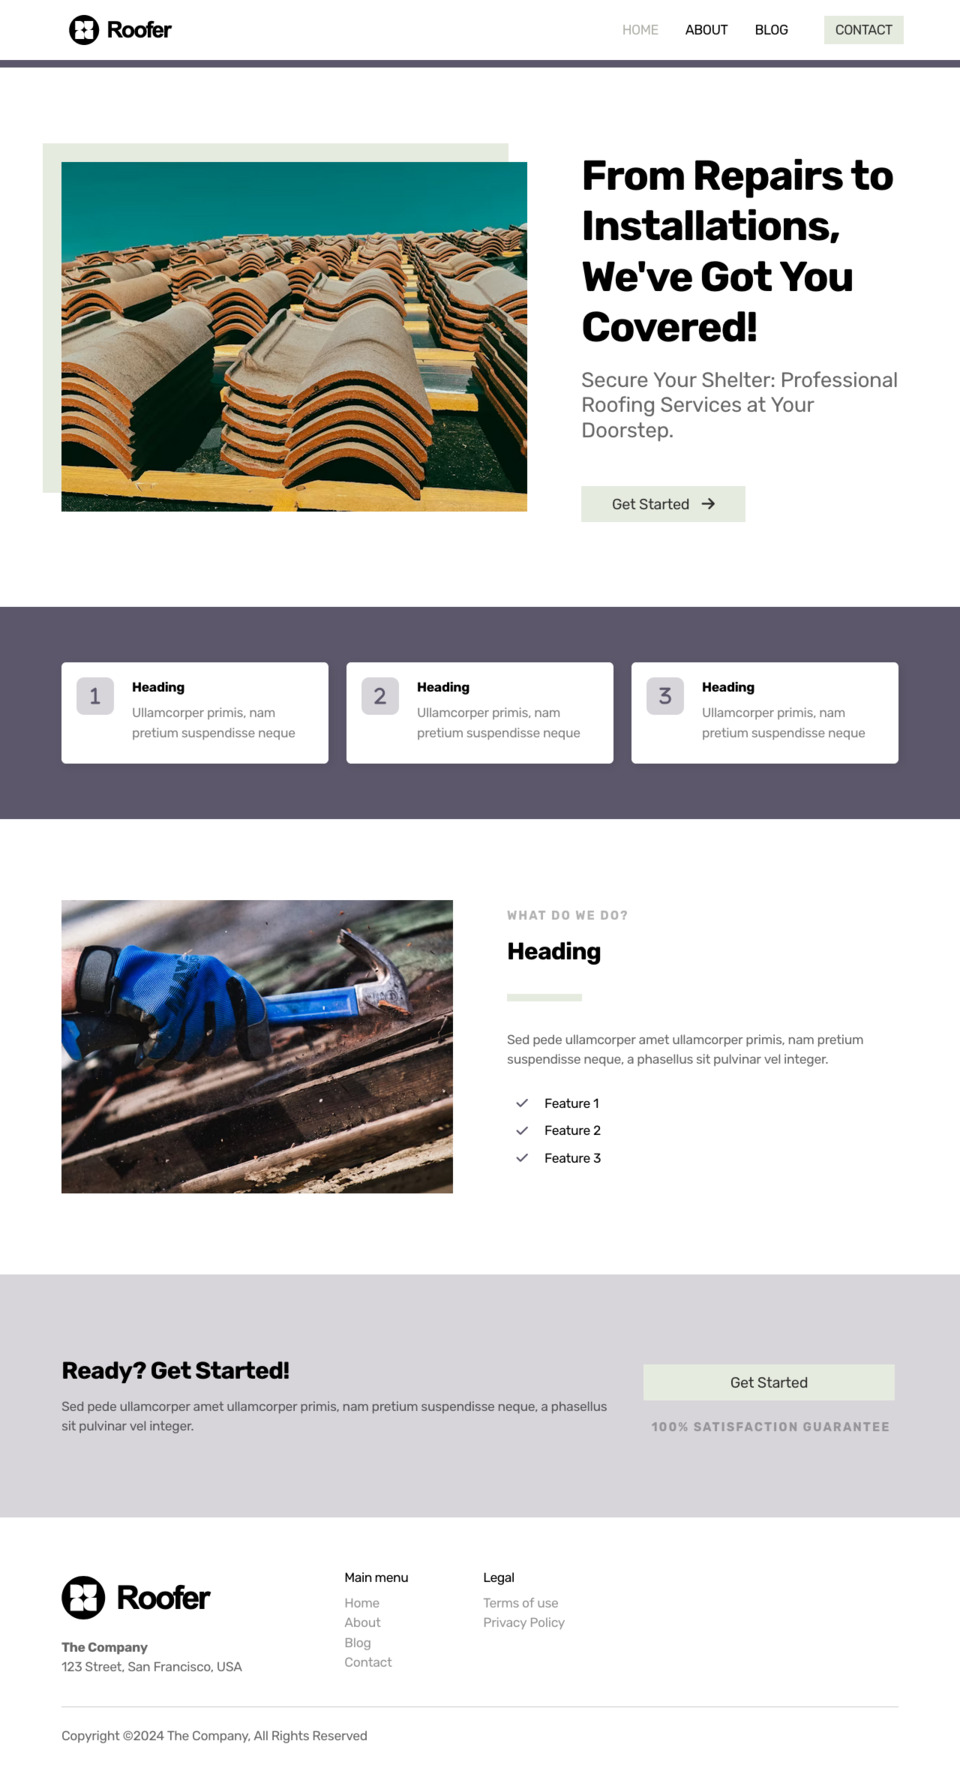 Roofer Website Template - Ideal for small business owners in the roofing, house construction, and architecture industries